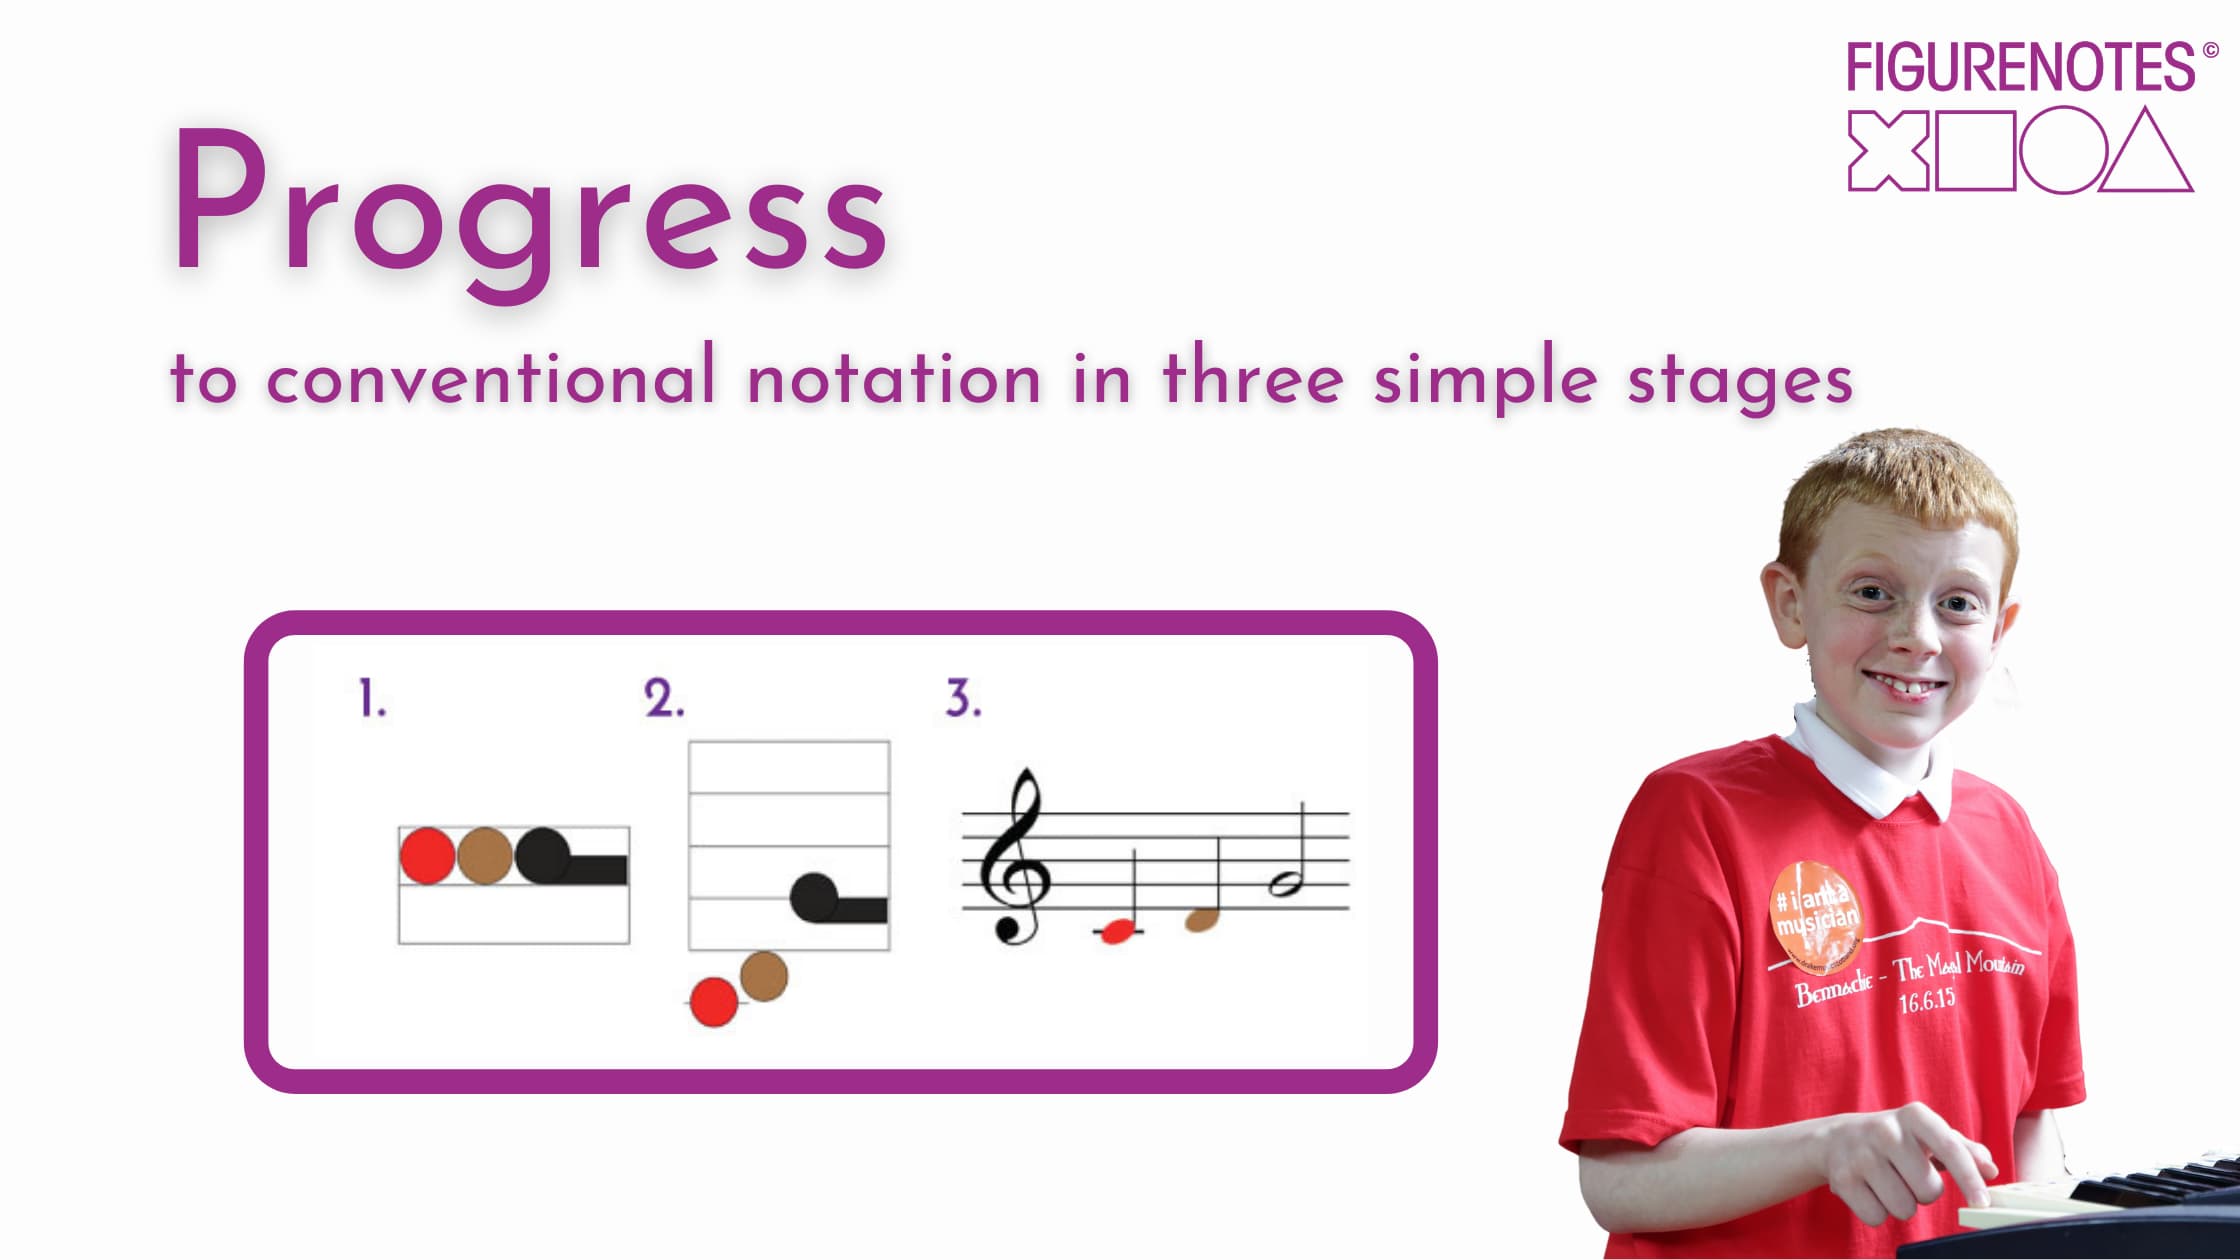 Progress to conventional notation through three simple stages.